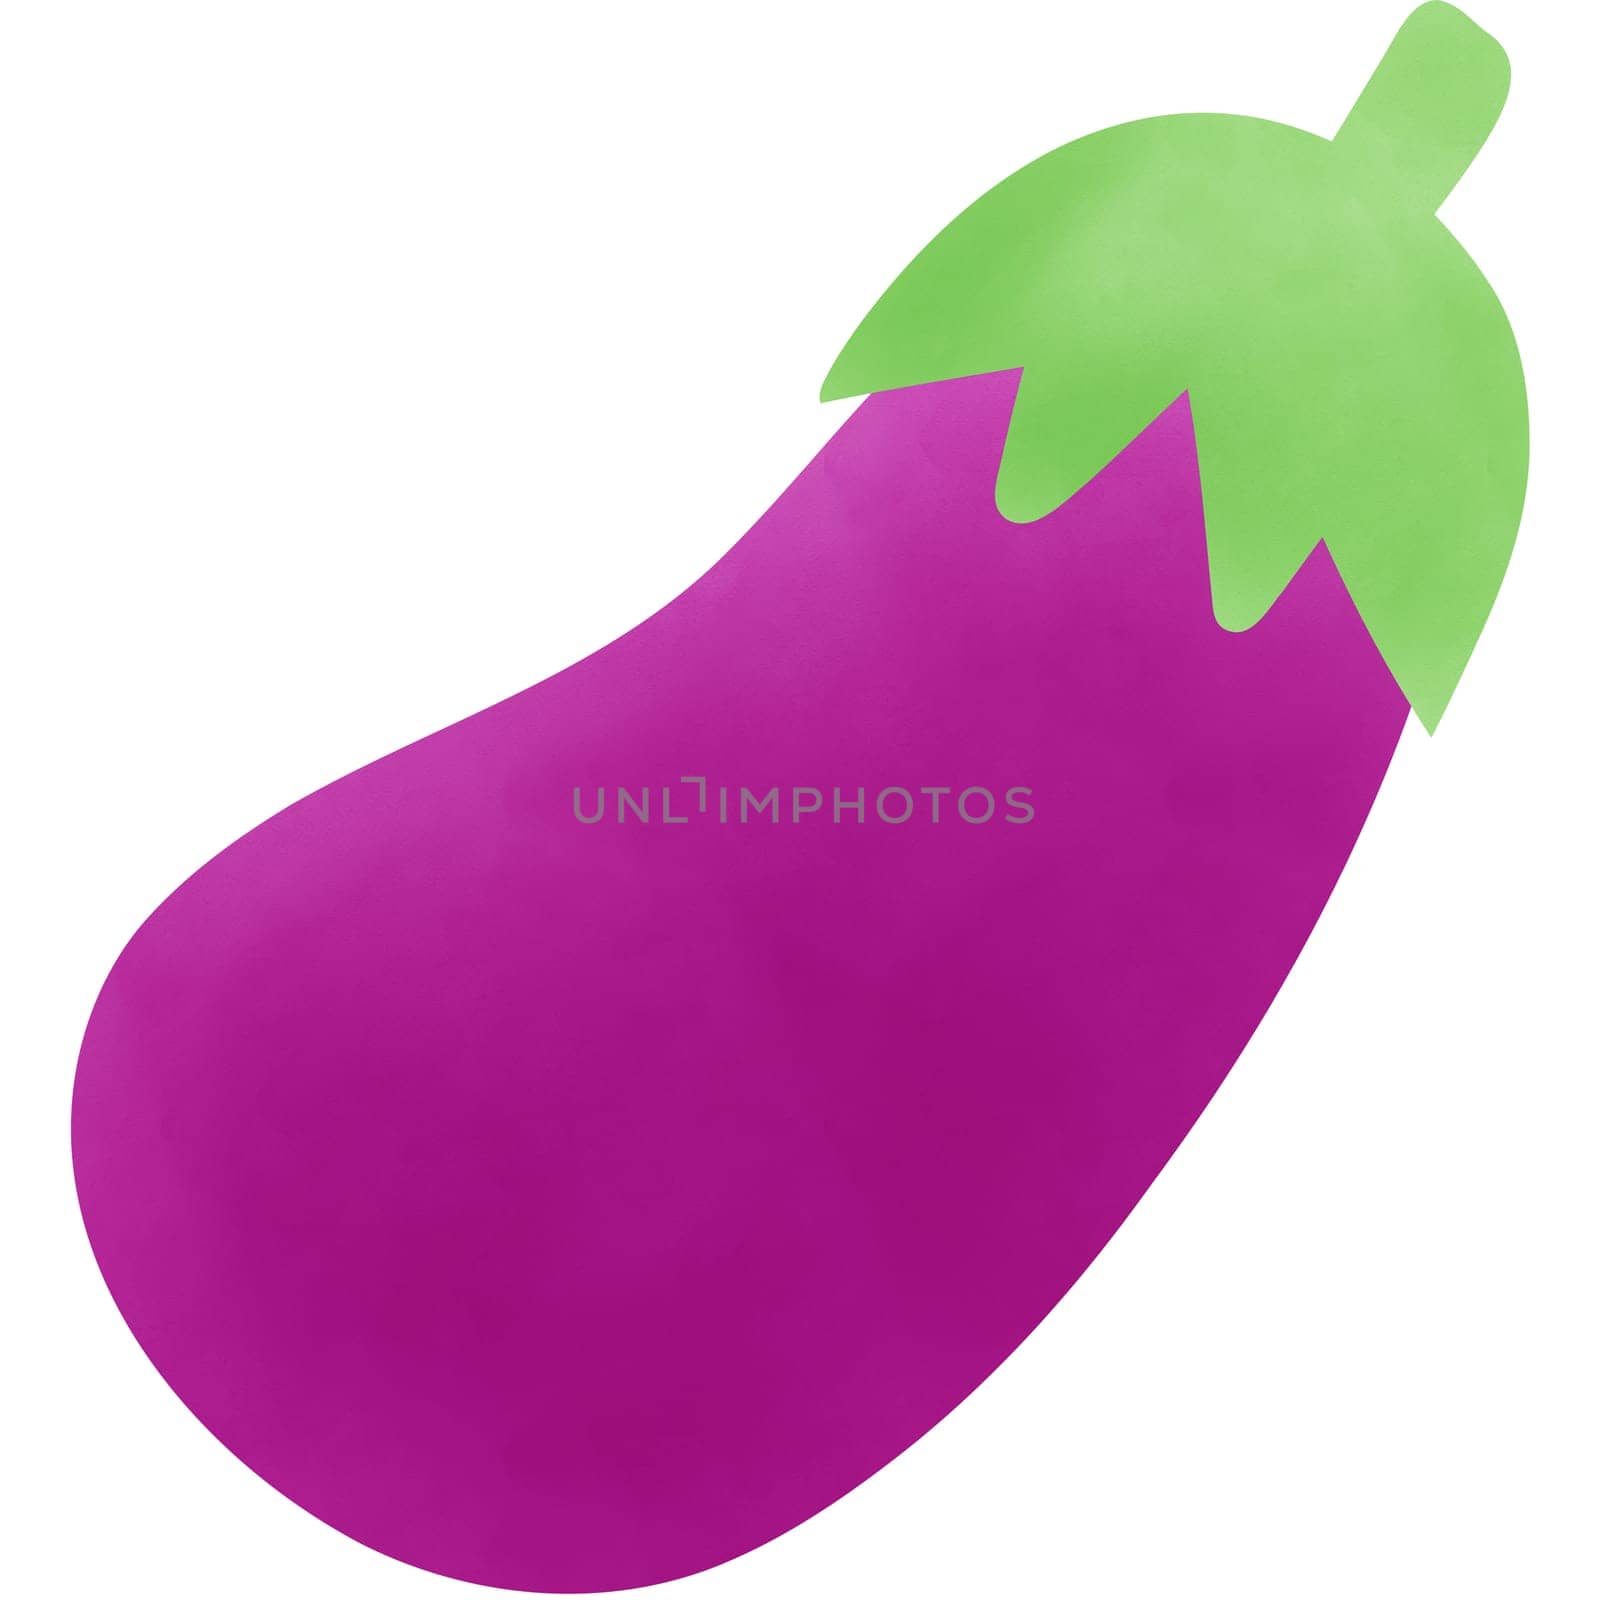 An illustration of a watercolor eggplant isolated on a white background provides a visually artistic depiction of this vegetable